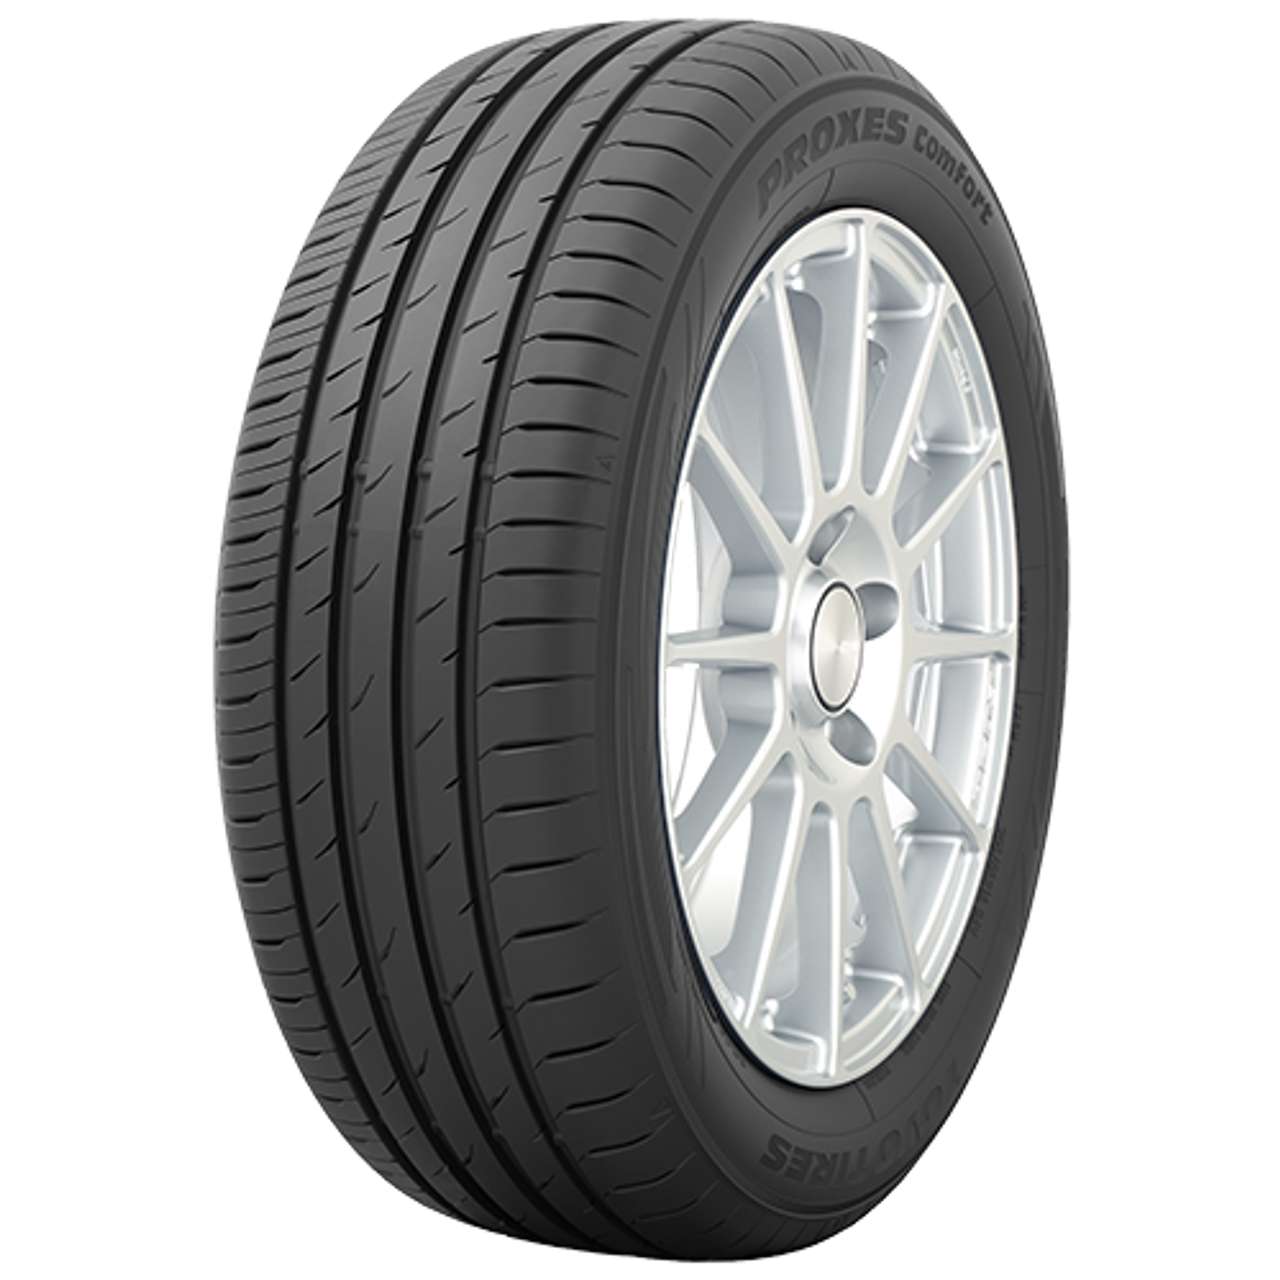 TOYO PROXES COMFORT SUV 225/55R18 102W BSW XL